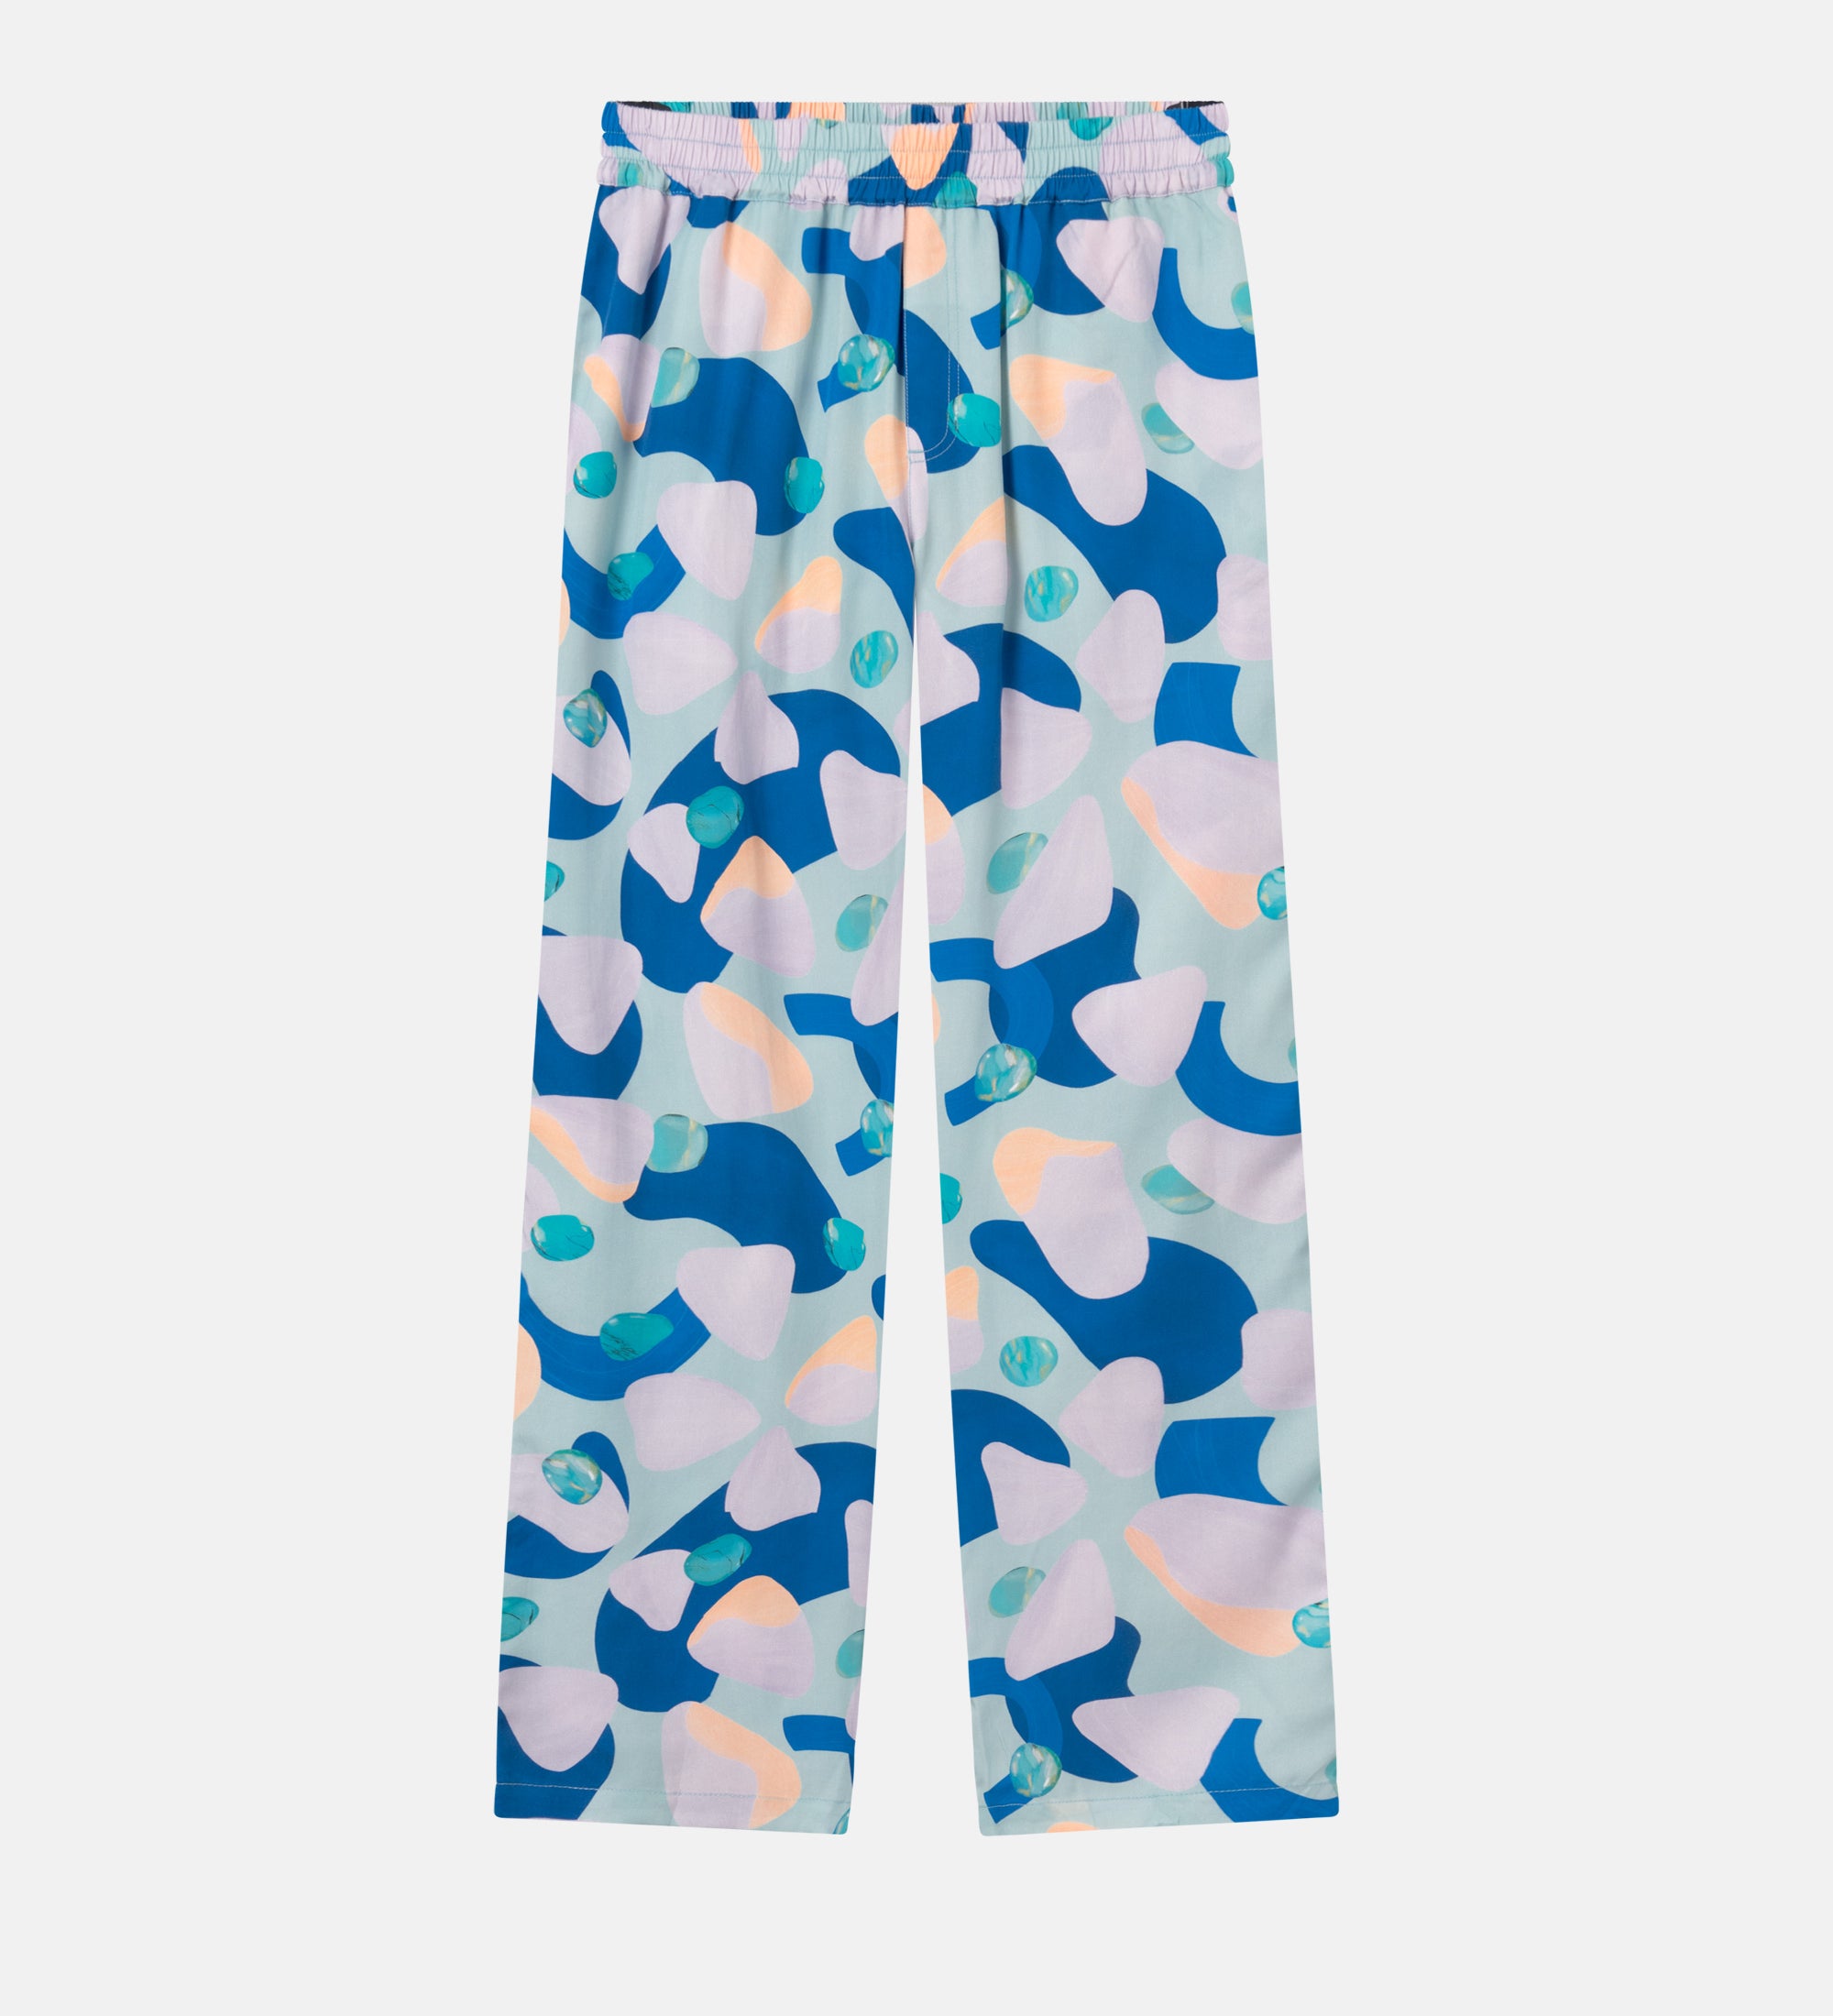 Vacation pants with a multi-colored graphic pattern, two front pockets, and an elastic drawstring.